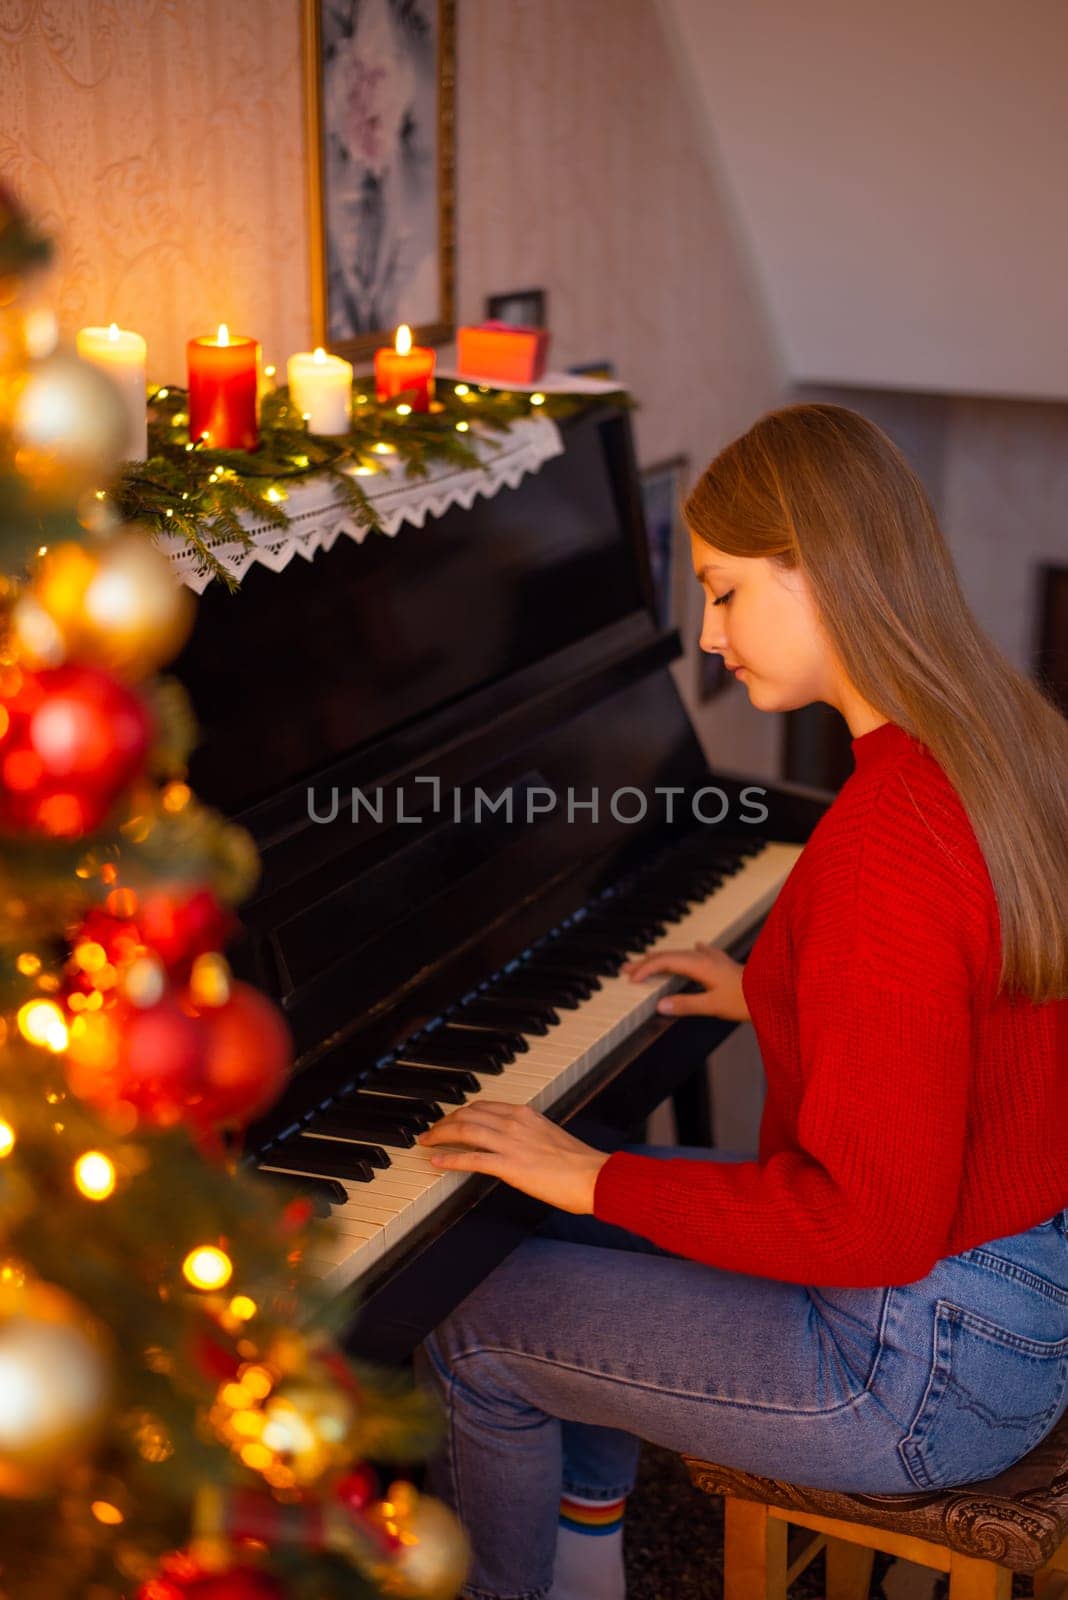 Christmas celebration, festive atmosphere, playing the piano Christmas songs